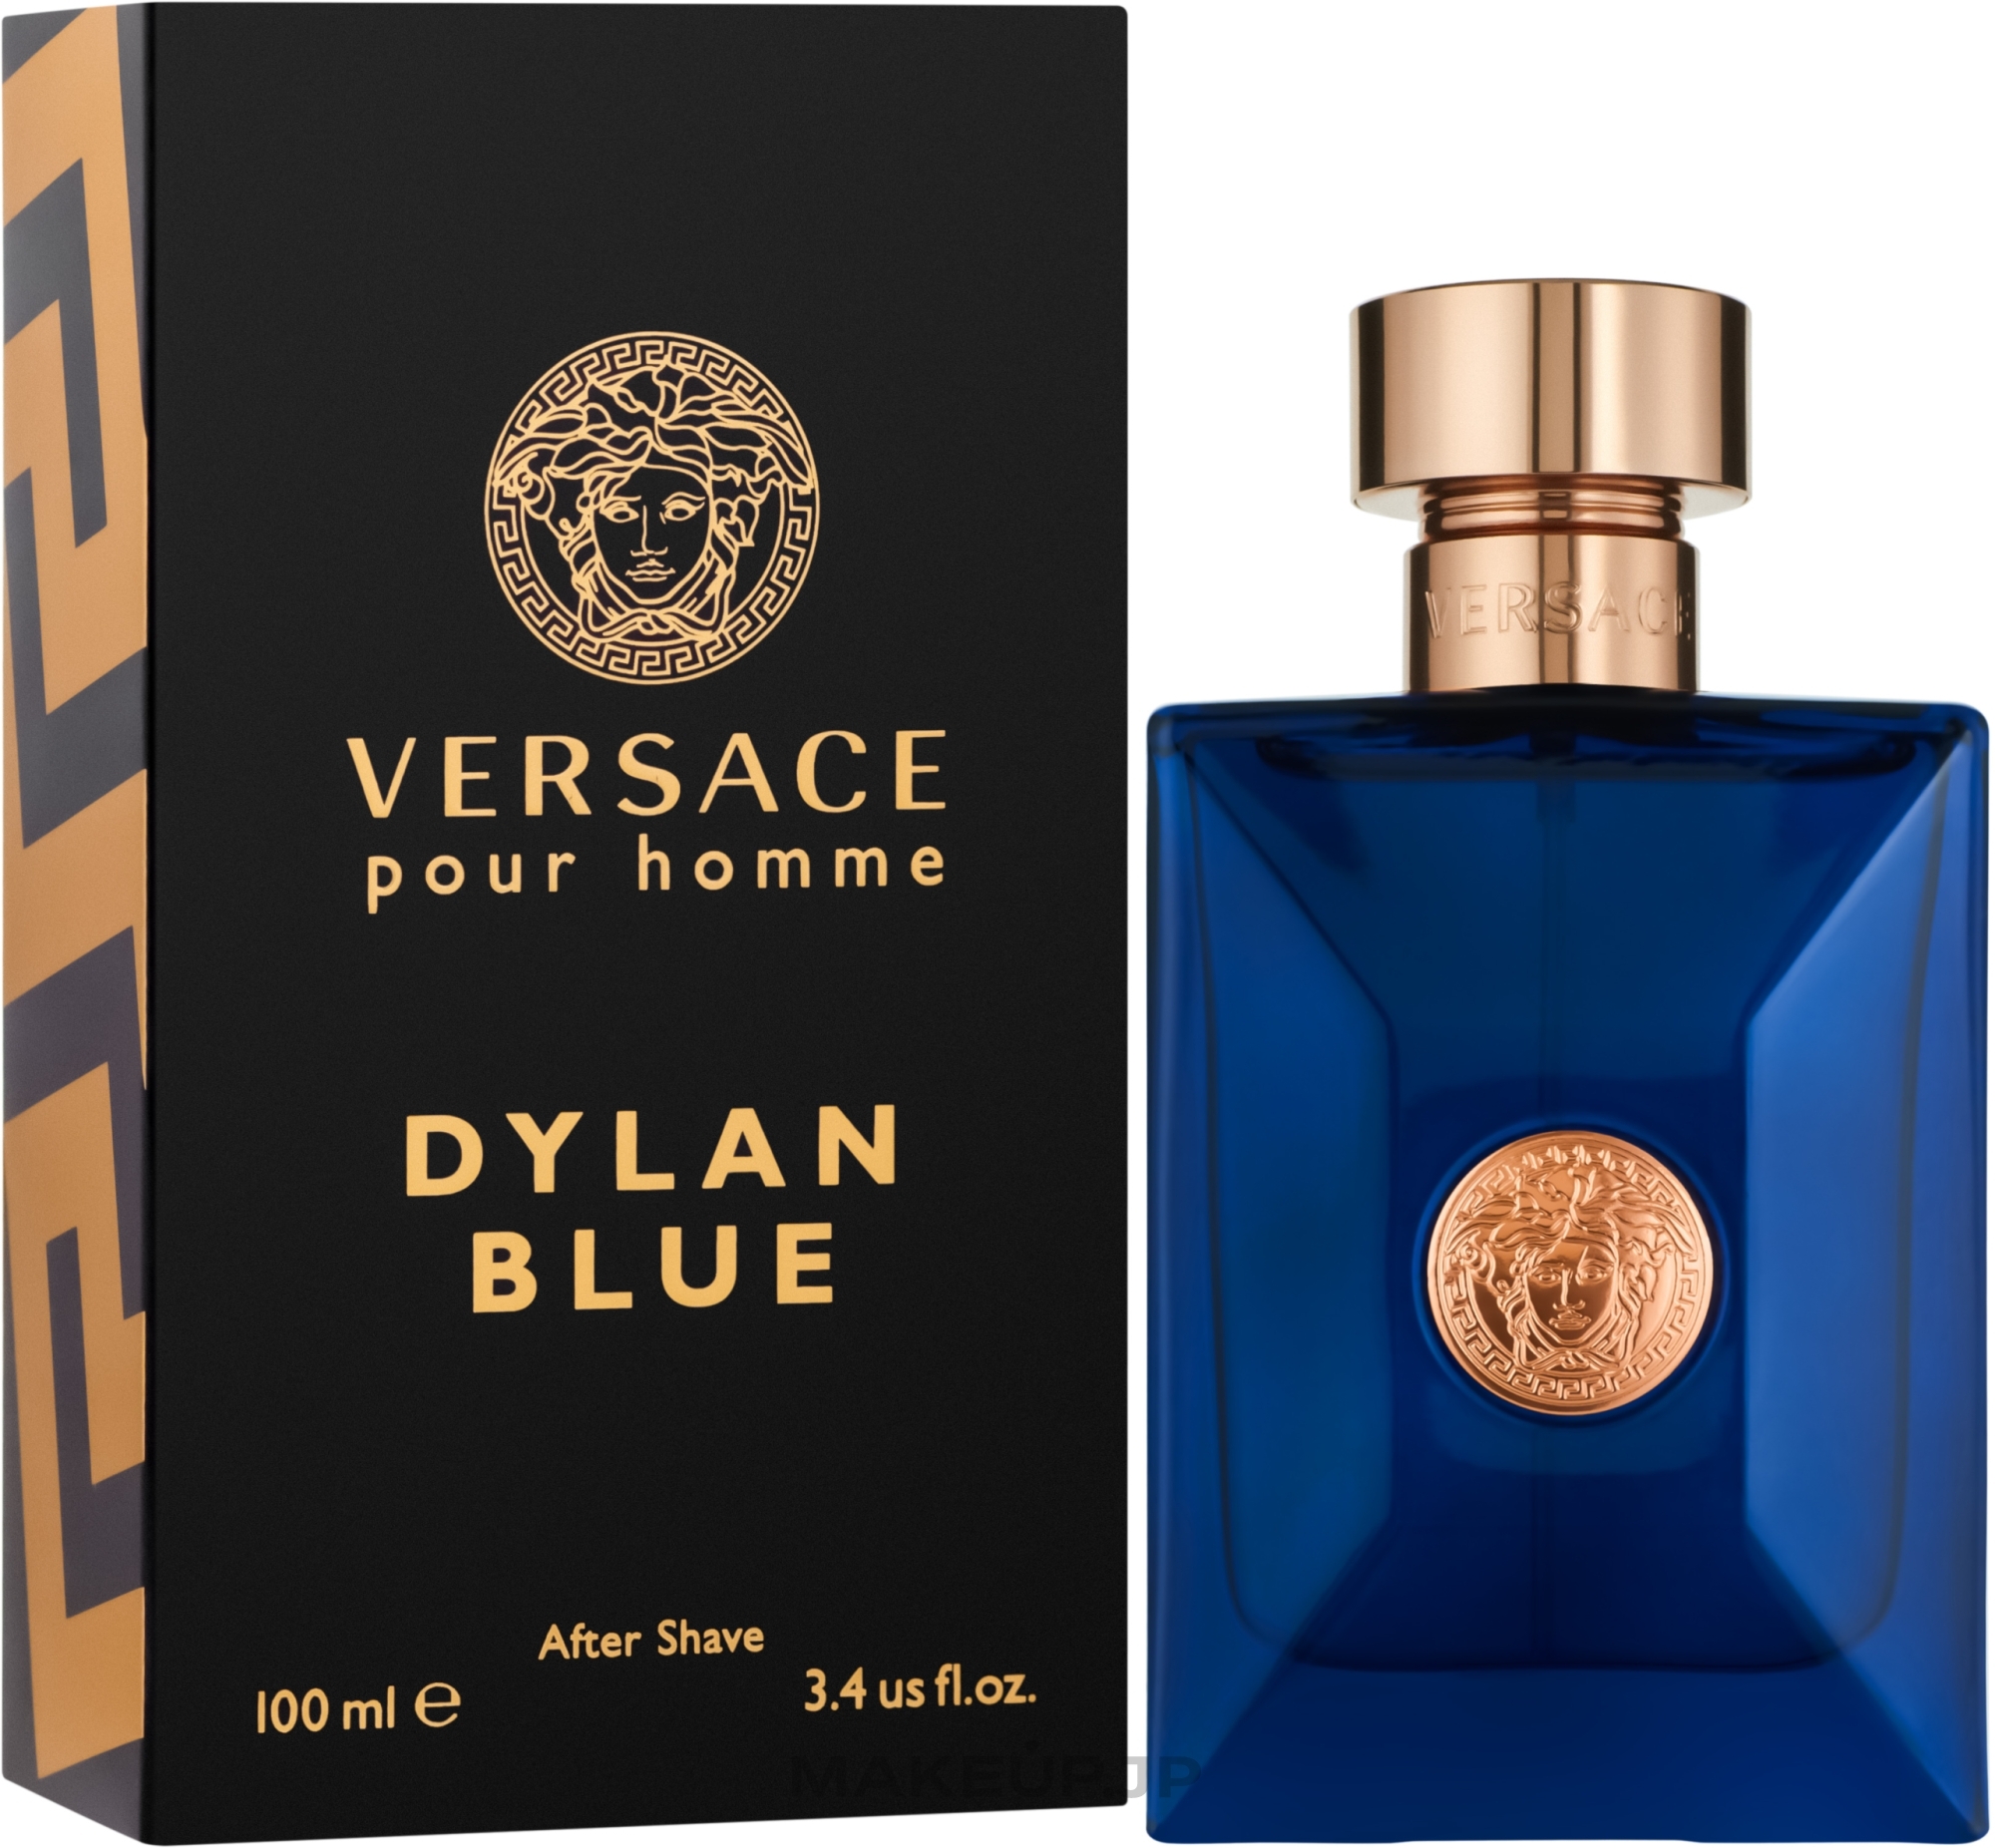 Versace Pour Homme Dylan Blue - After Shave Lotion — photo 100 ml